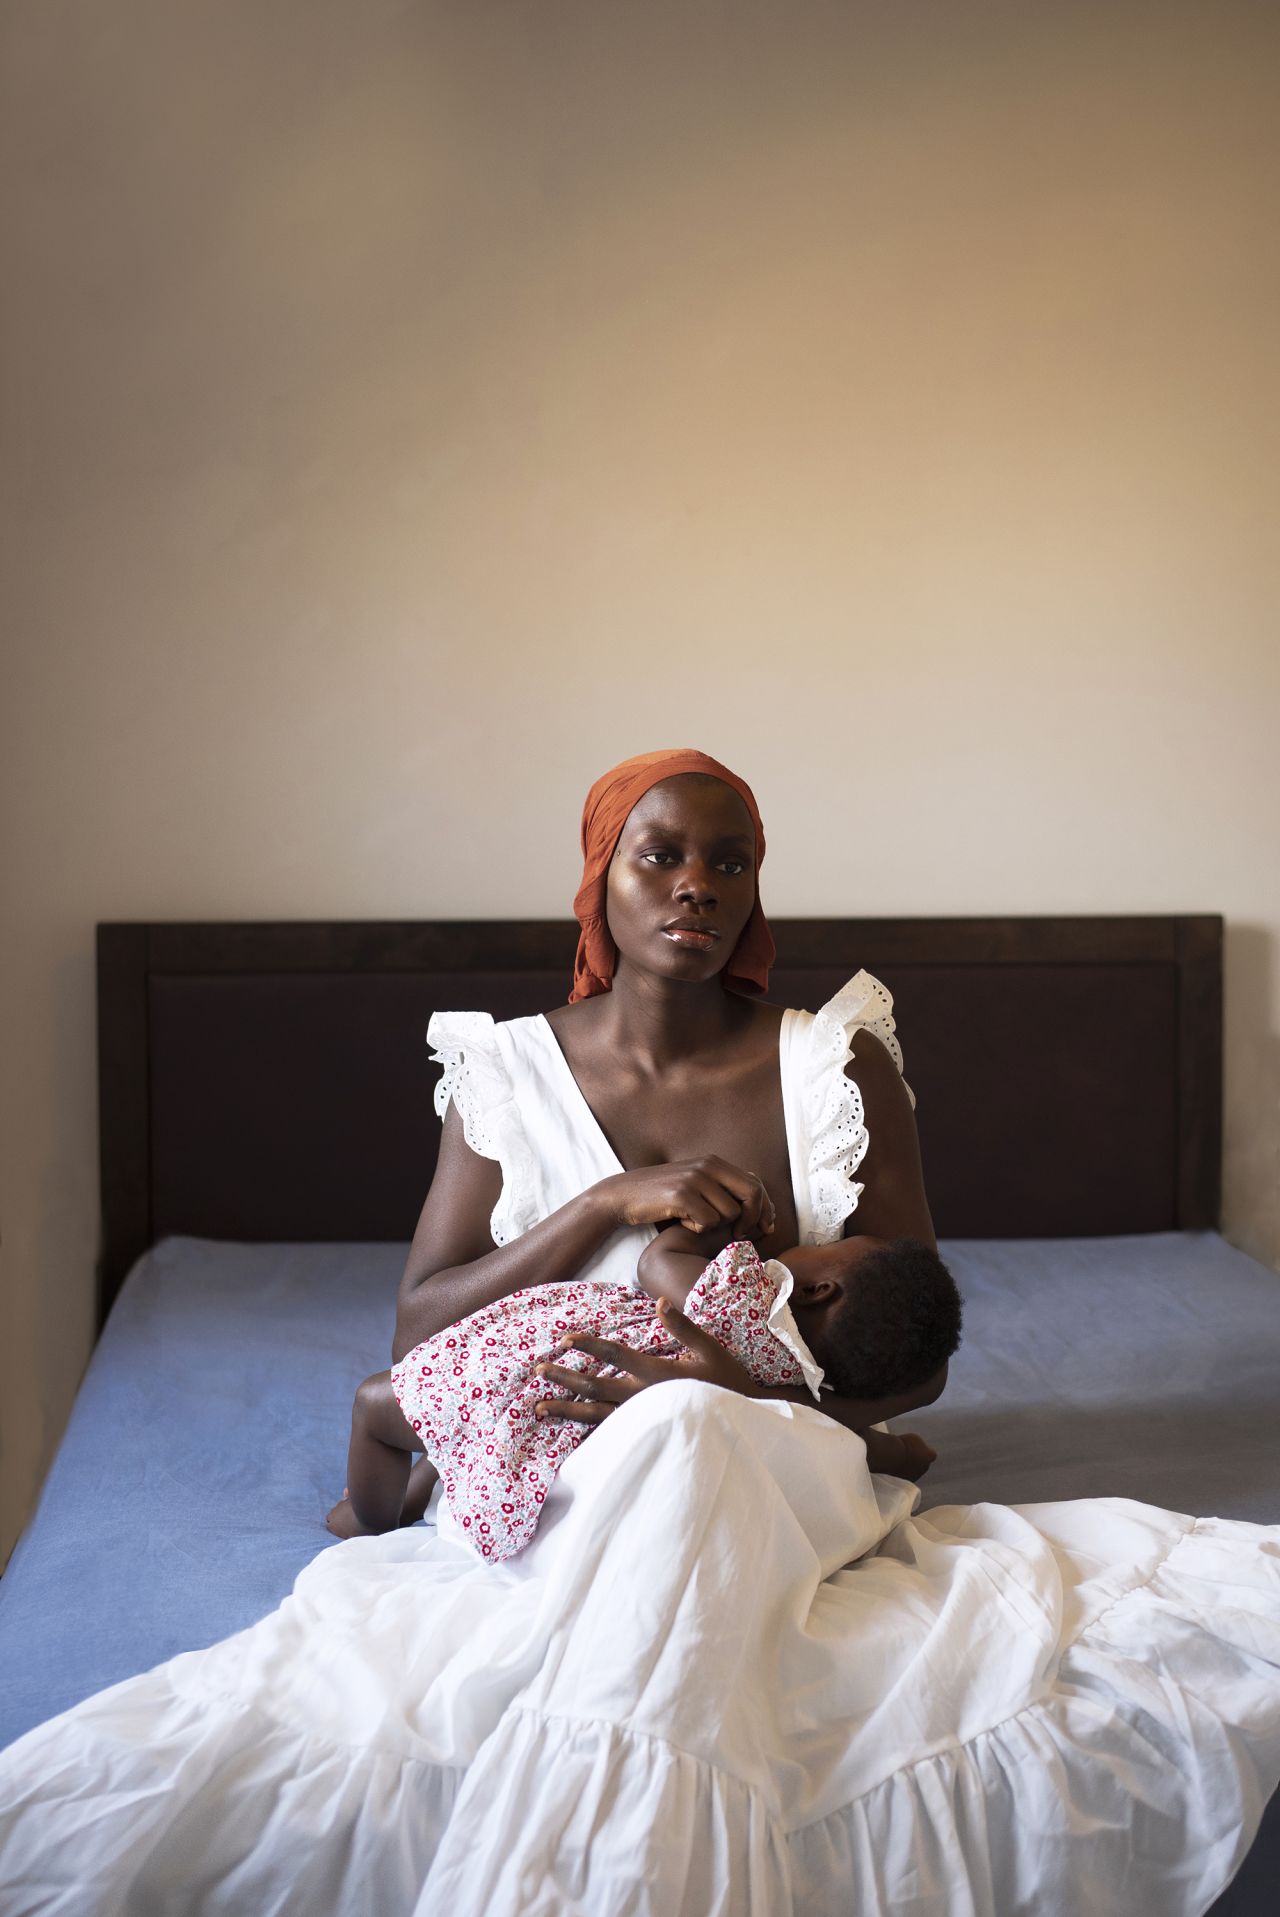 <a href="https://dolaposh.myportfolio.com/" target="_blank" target="_blank">Adenike Sogbesan</a> took this self-portrait while breastfeeding her daughter, Monioluwa."In the beginning, motherhood was overwhelming," she said. "All I did was care for my daughter. Neglecting myself and my health made me suffer from postpartum depression, but somehow I found the strength to seek help from professionals. They worked together to remind me of things that struck happiness. The answer was photography, personal care and nature. So I started making self-portraits. My biggest triumph is not having to let go of what I love: photography."